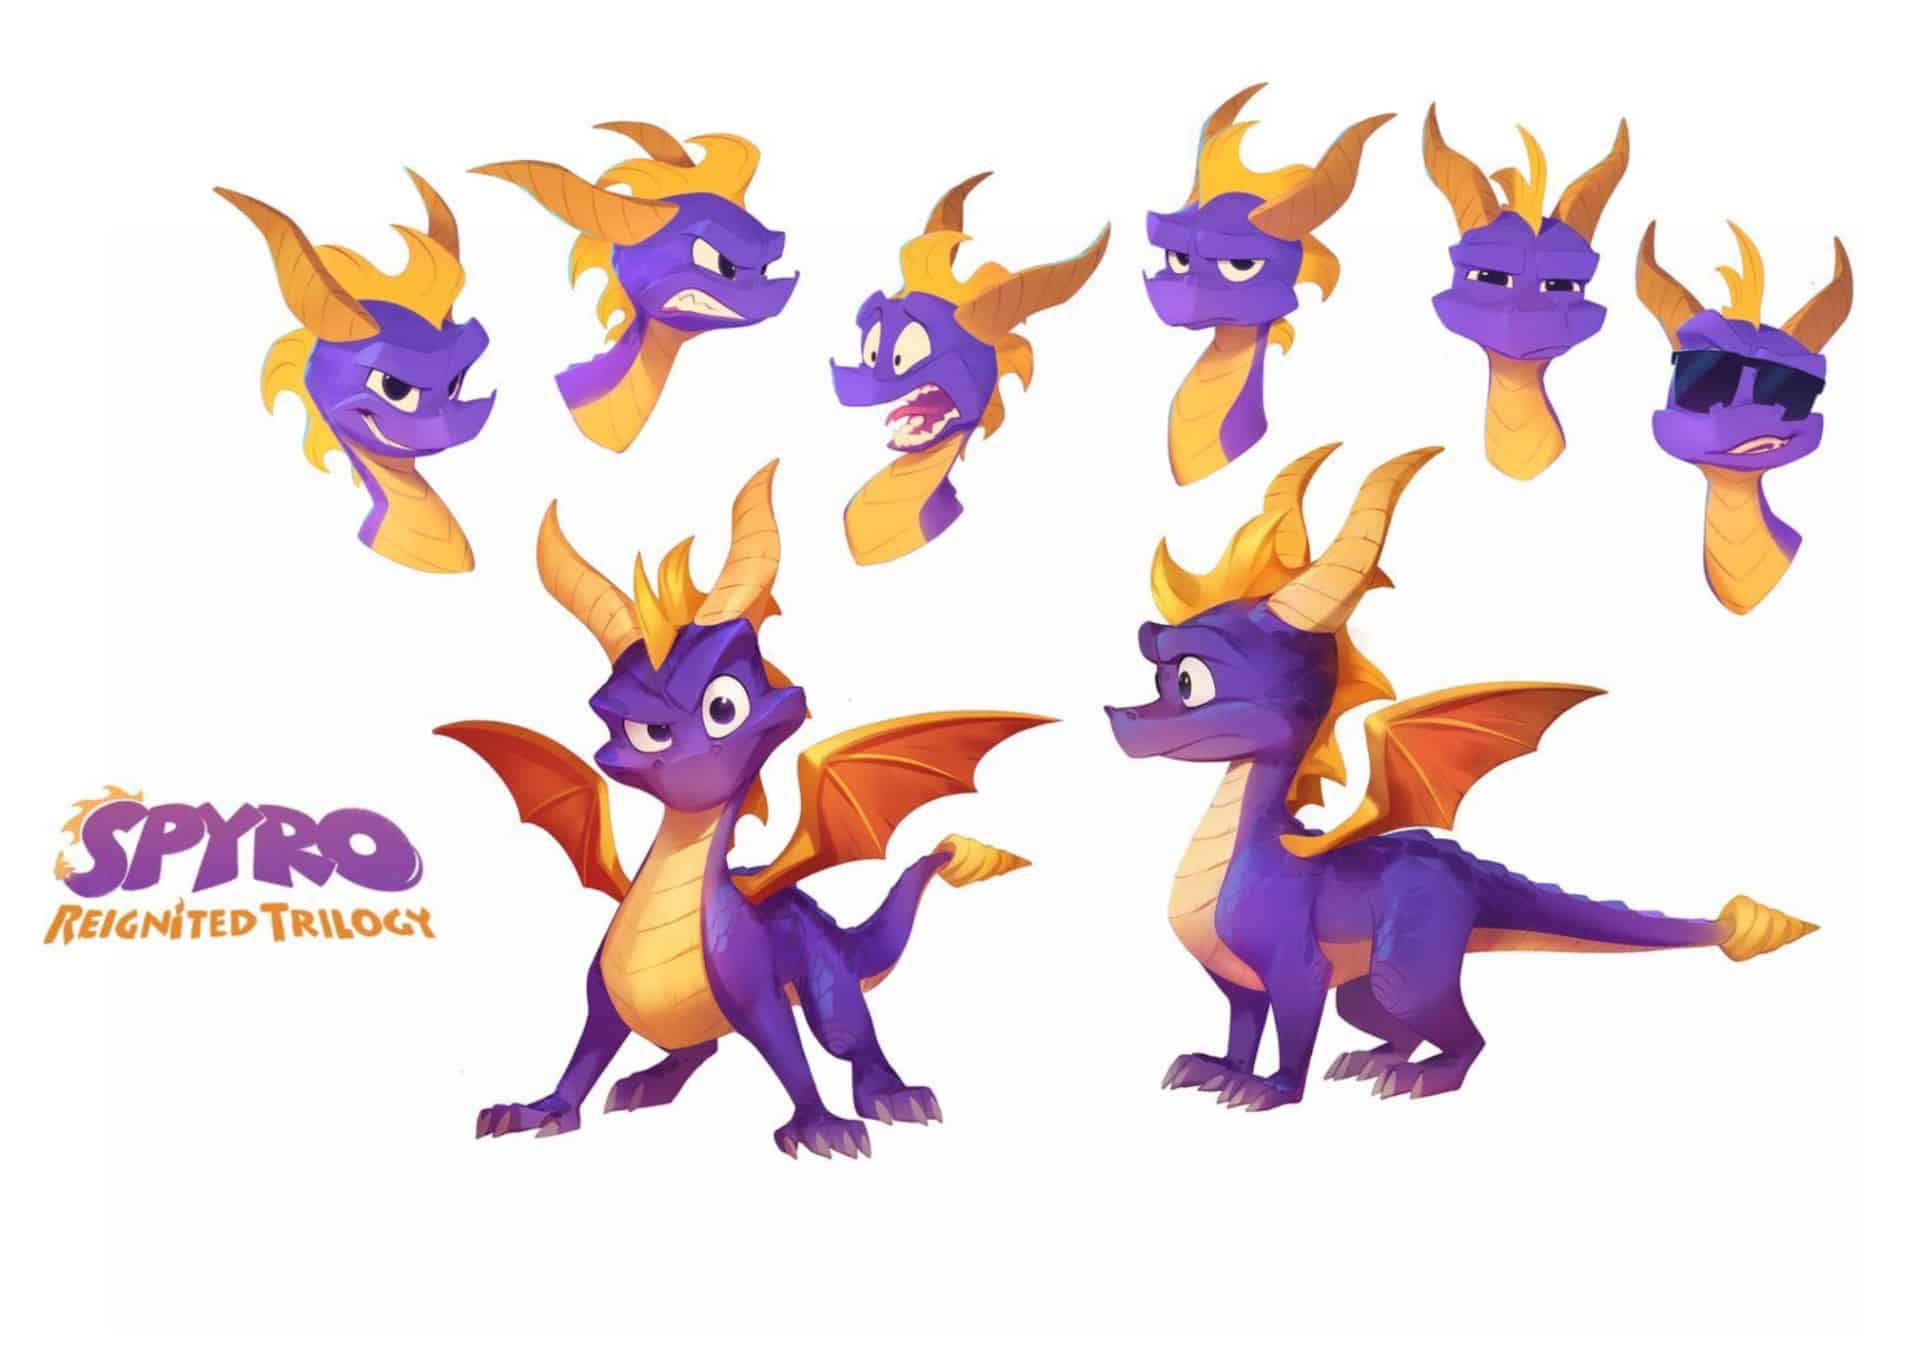 character designer Nicholas Kole interview Toys for Bob Spyro Reignited Trilogy Insomniac Games Naughty Dog Activision Crash Bandicoot 4: It's About Time